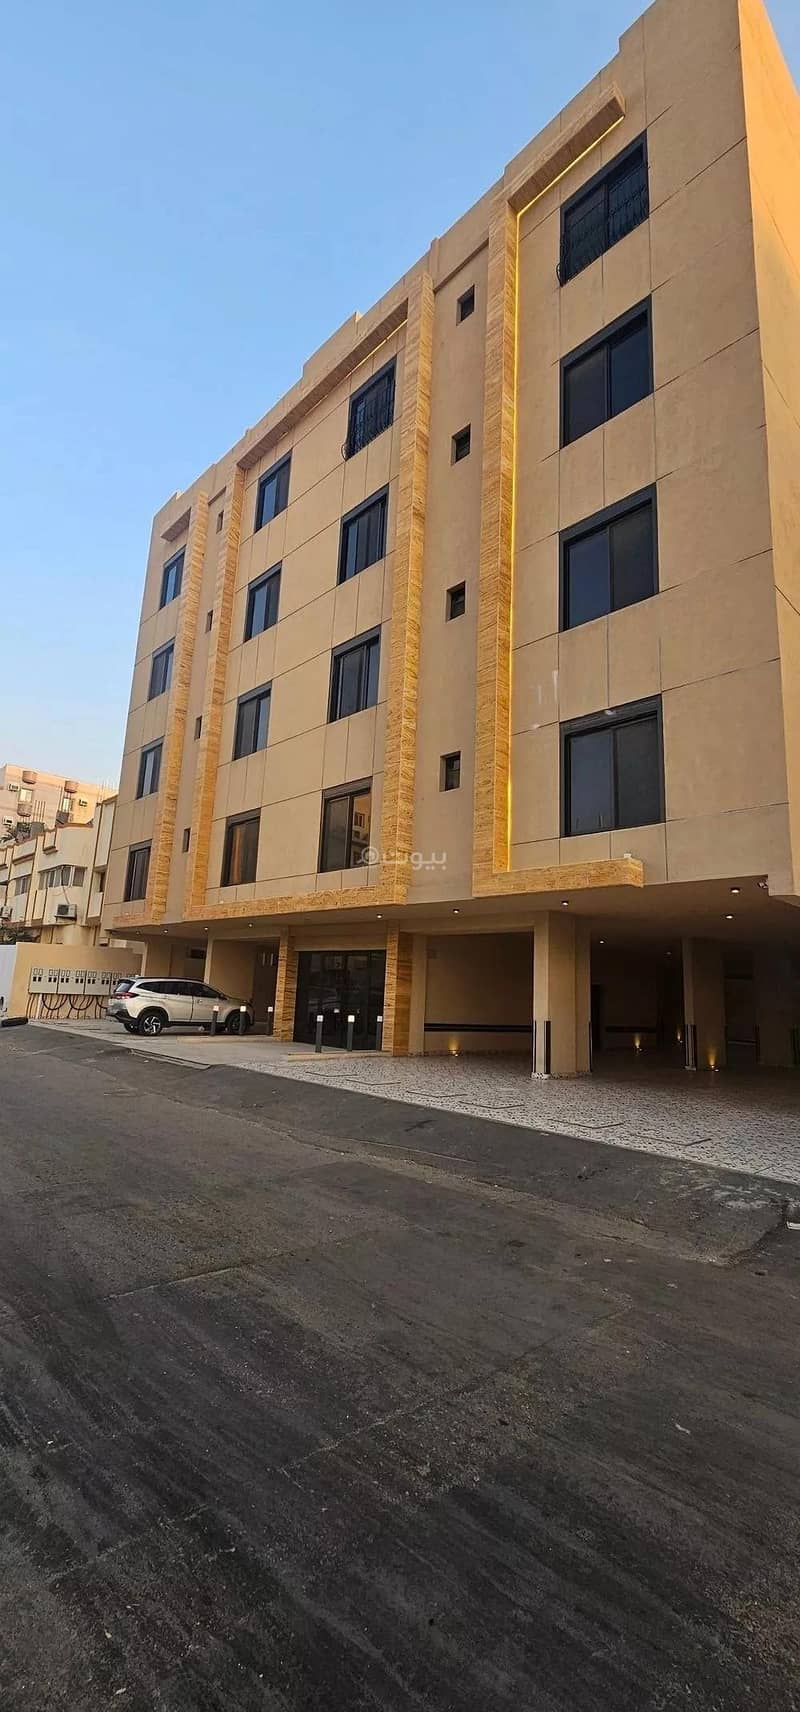 4 Bedrooms Apartment For Sale Jeddah